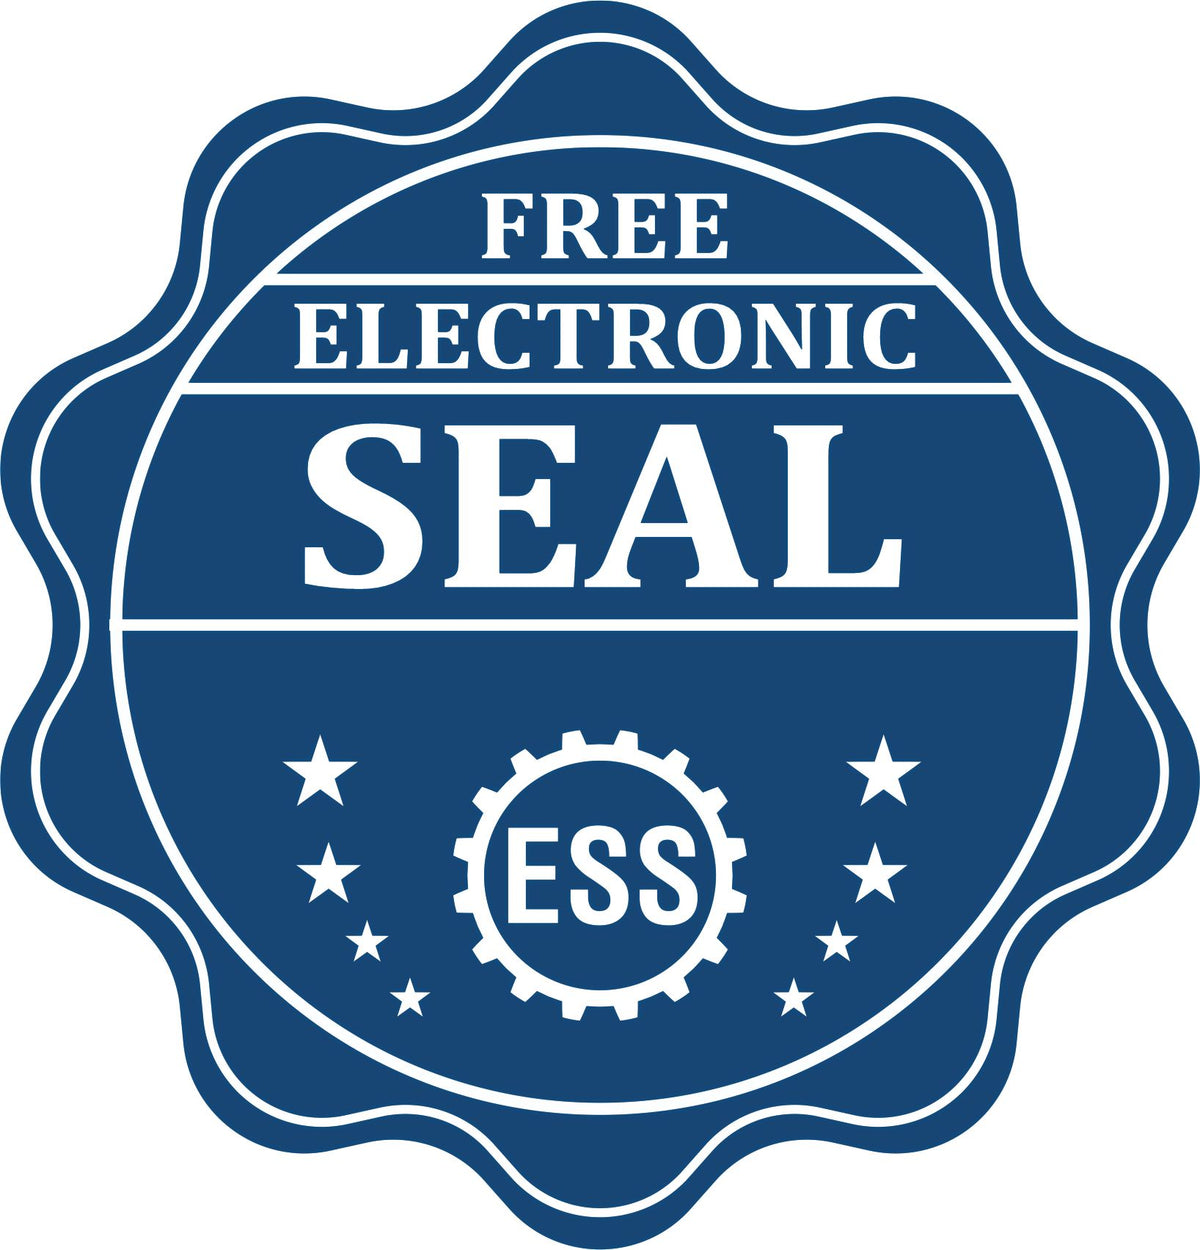 A badge showing a free electronic seal for the Slim Pre-Inked North Dakota Architect Seal Stamp with stars and the ESS gear on the emblem.